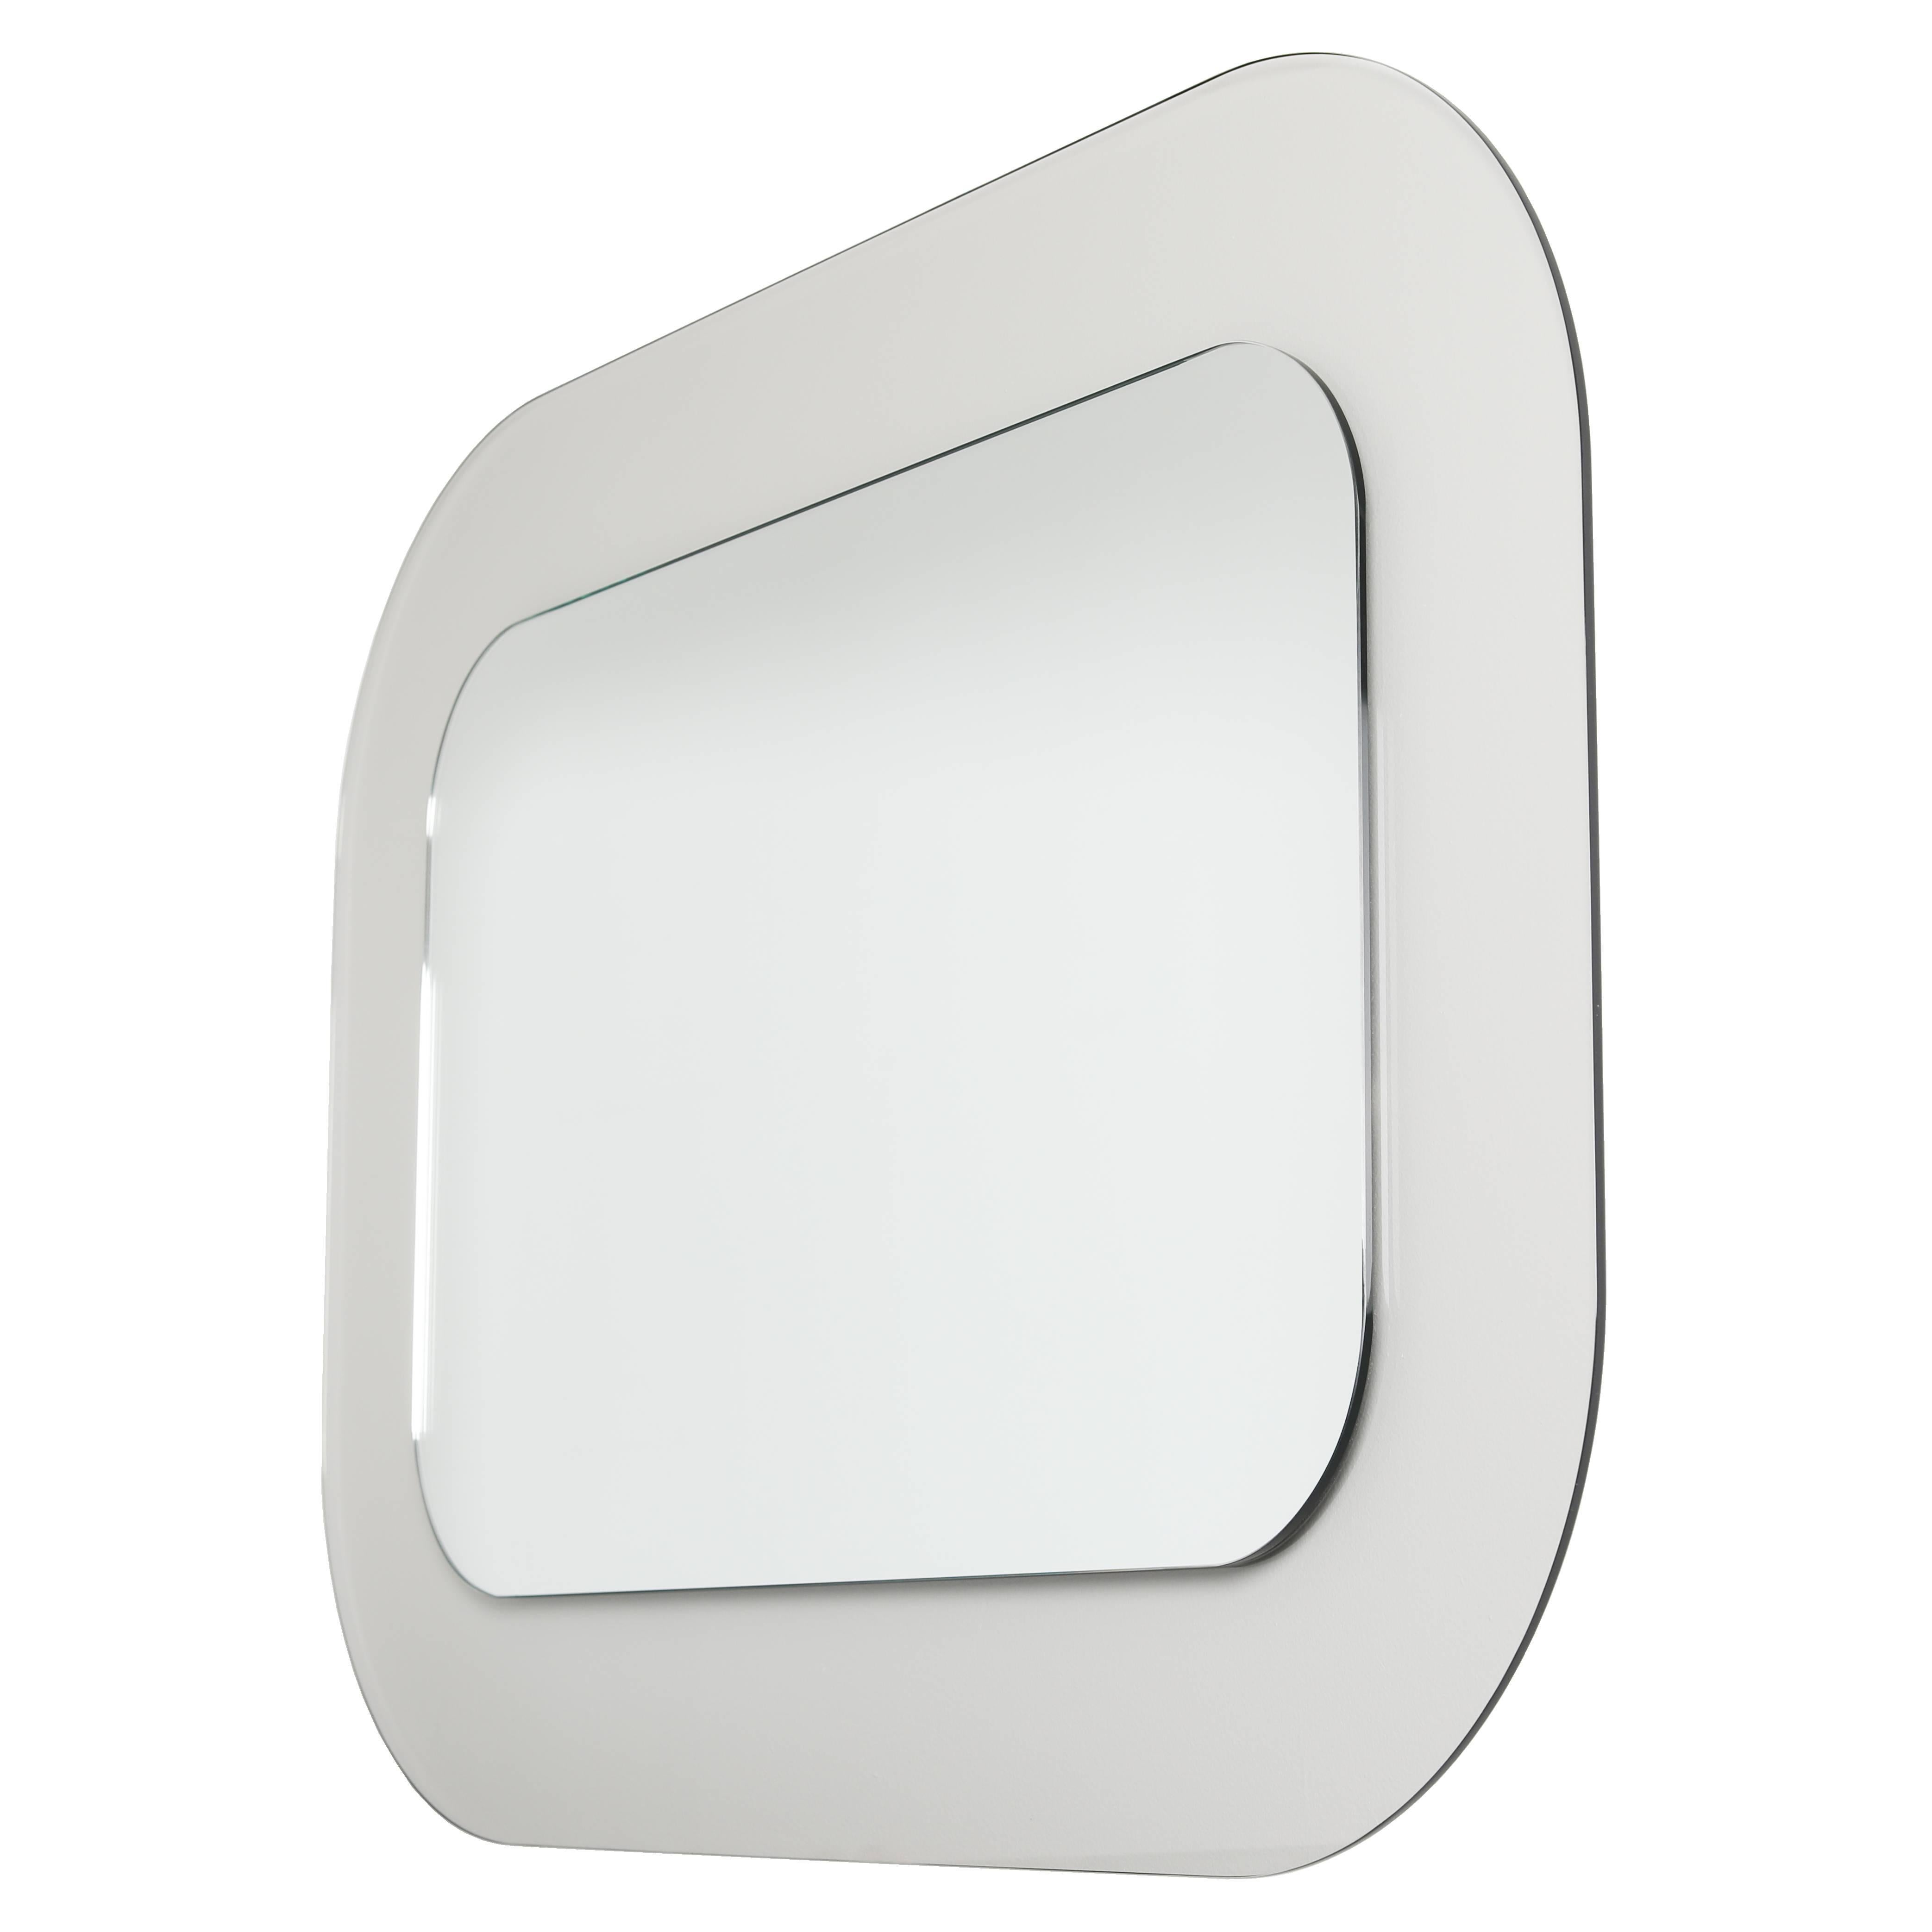 This piece is part of a new line of full circle modern original fully customizable, acrylic-frame mirrors. The translucent frame is reminiscent of the 1950s curvaceous glass designs by legendary Italian maker Fontana Arte, but with a shape and